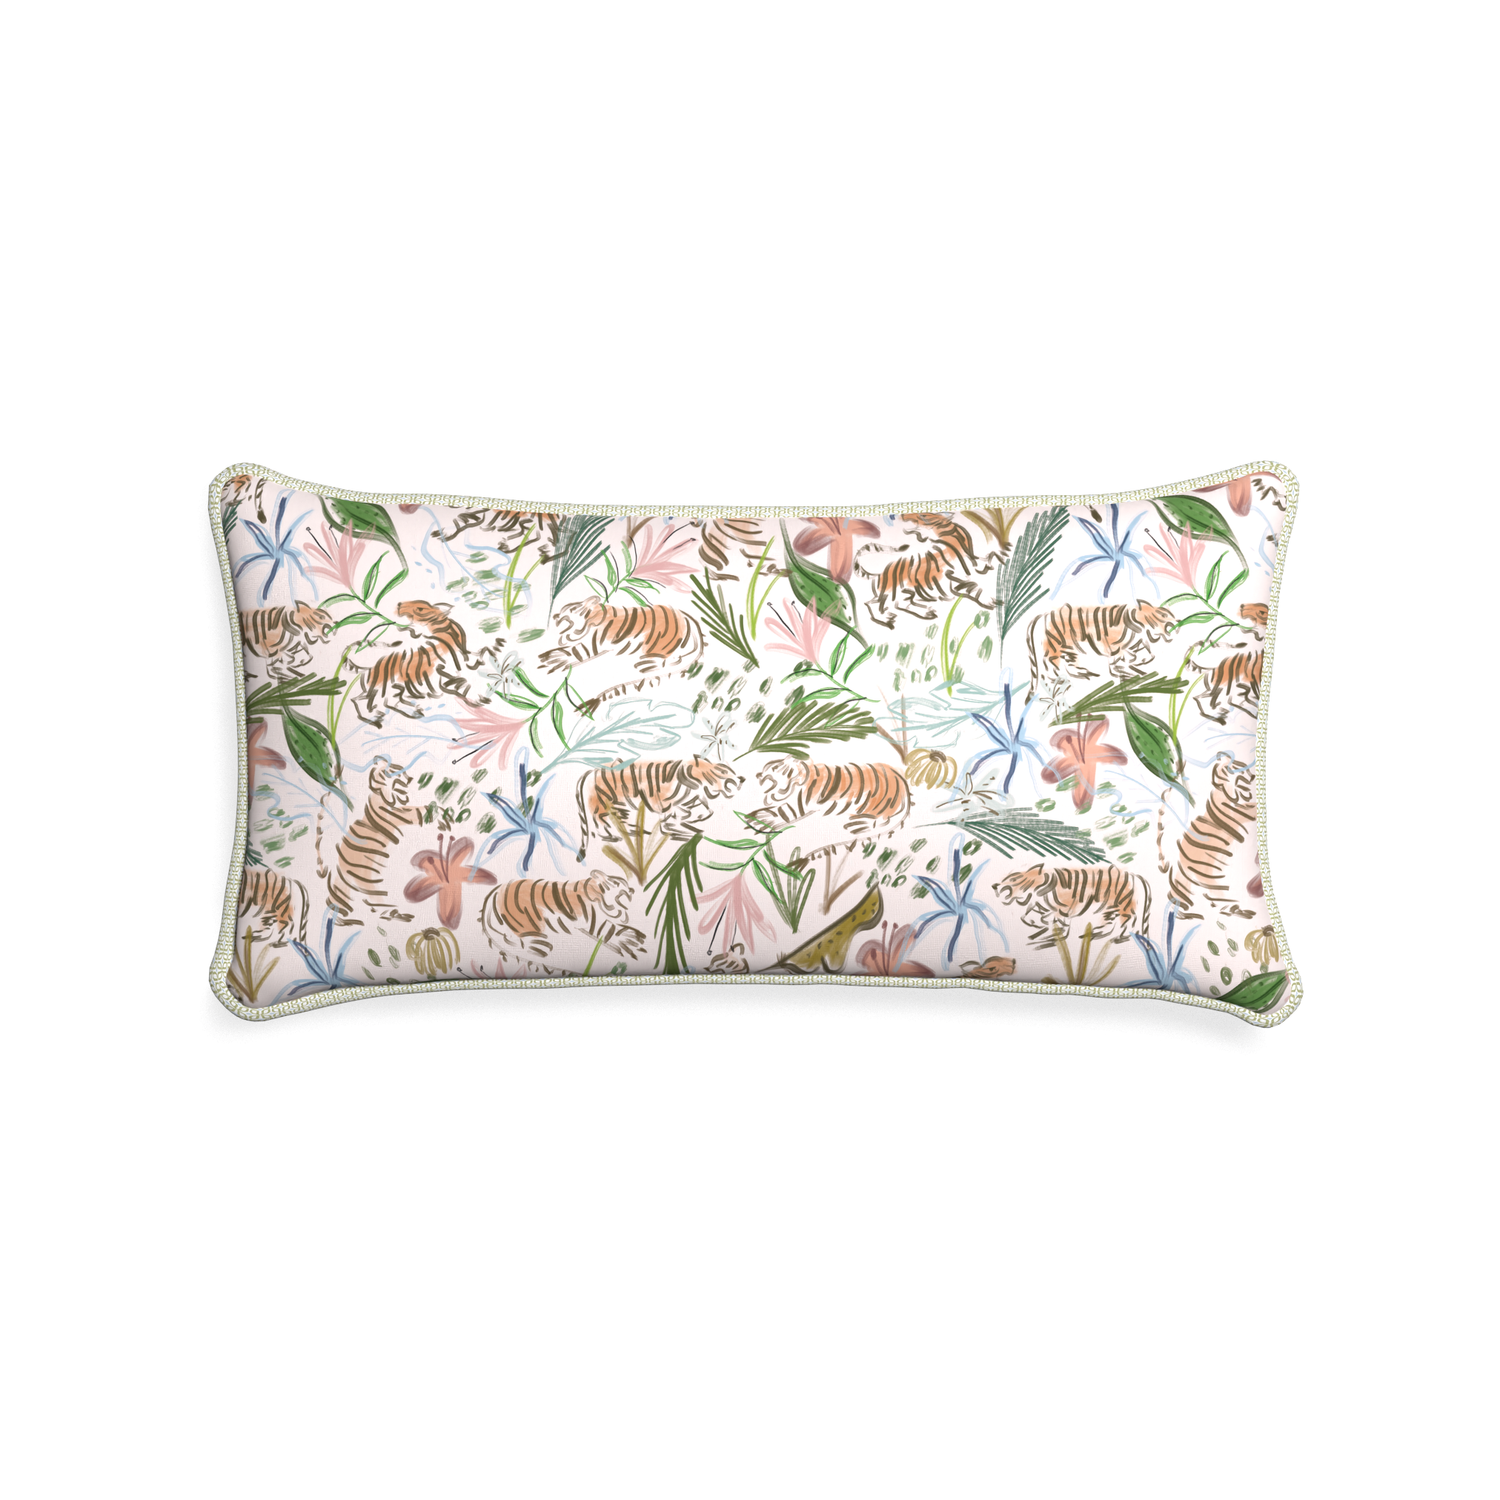 Midi-lumbar frida pink custom pink chinoiserie tigerpillow with l piping on white background